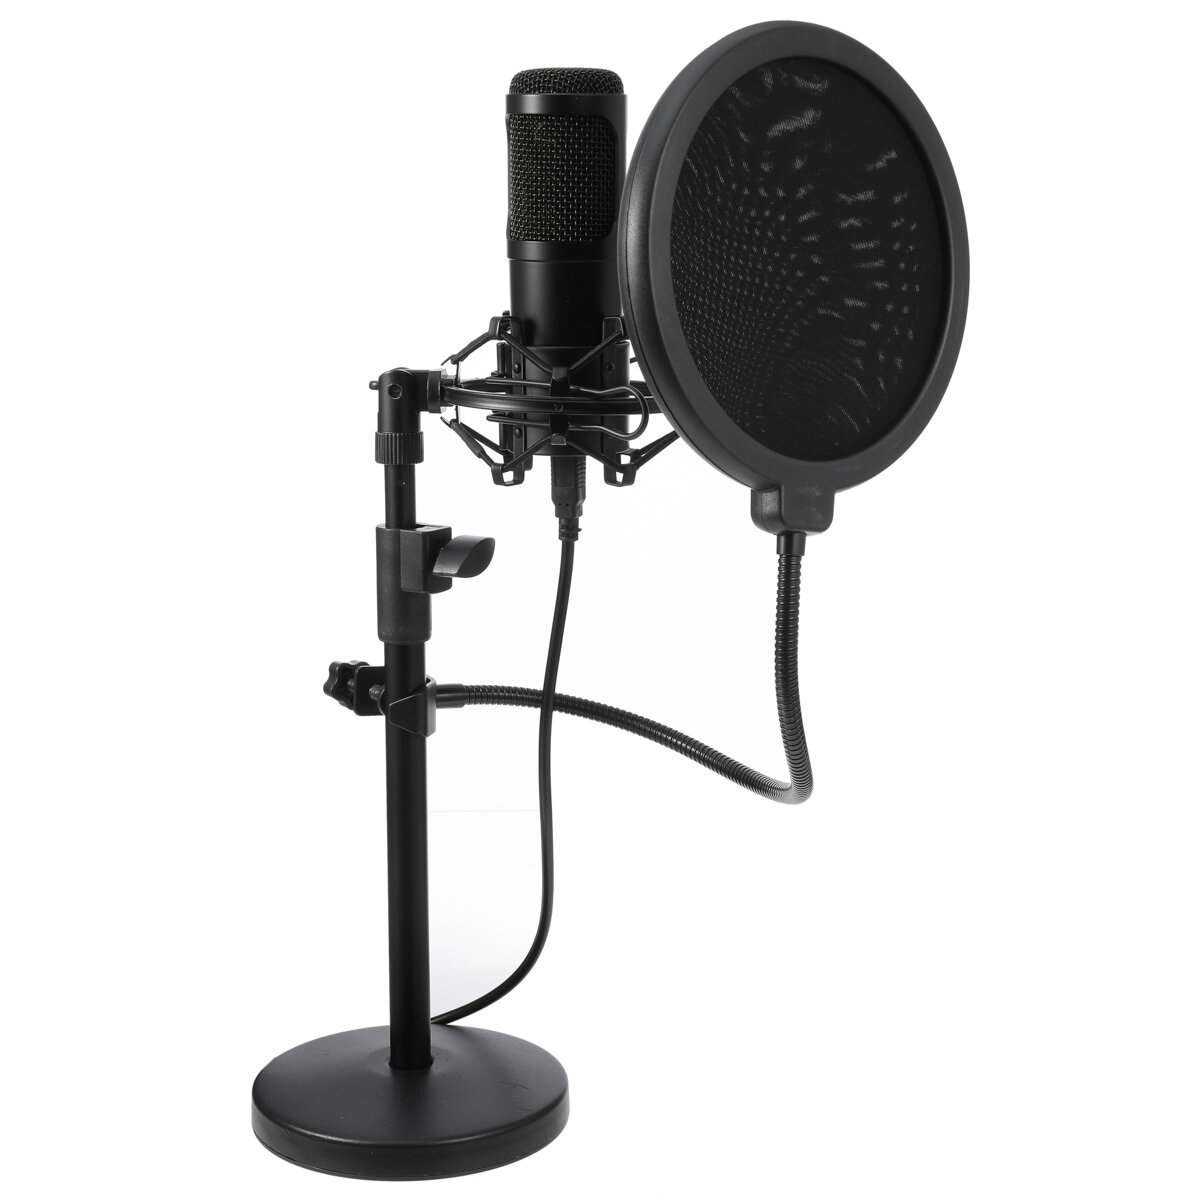 Image of KBP MX28 USB Computer Cardioid Microphone Podcast Condenser Microphone